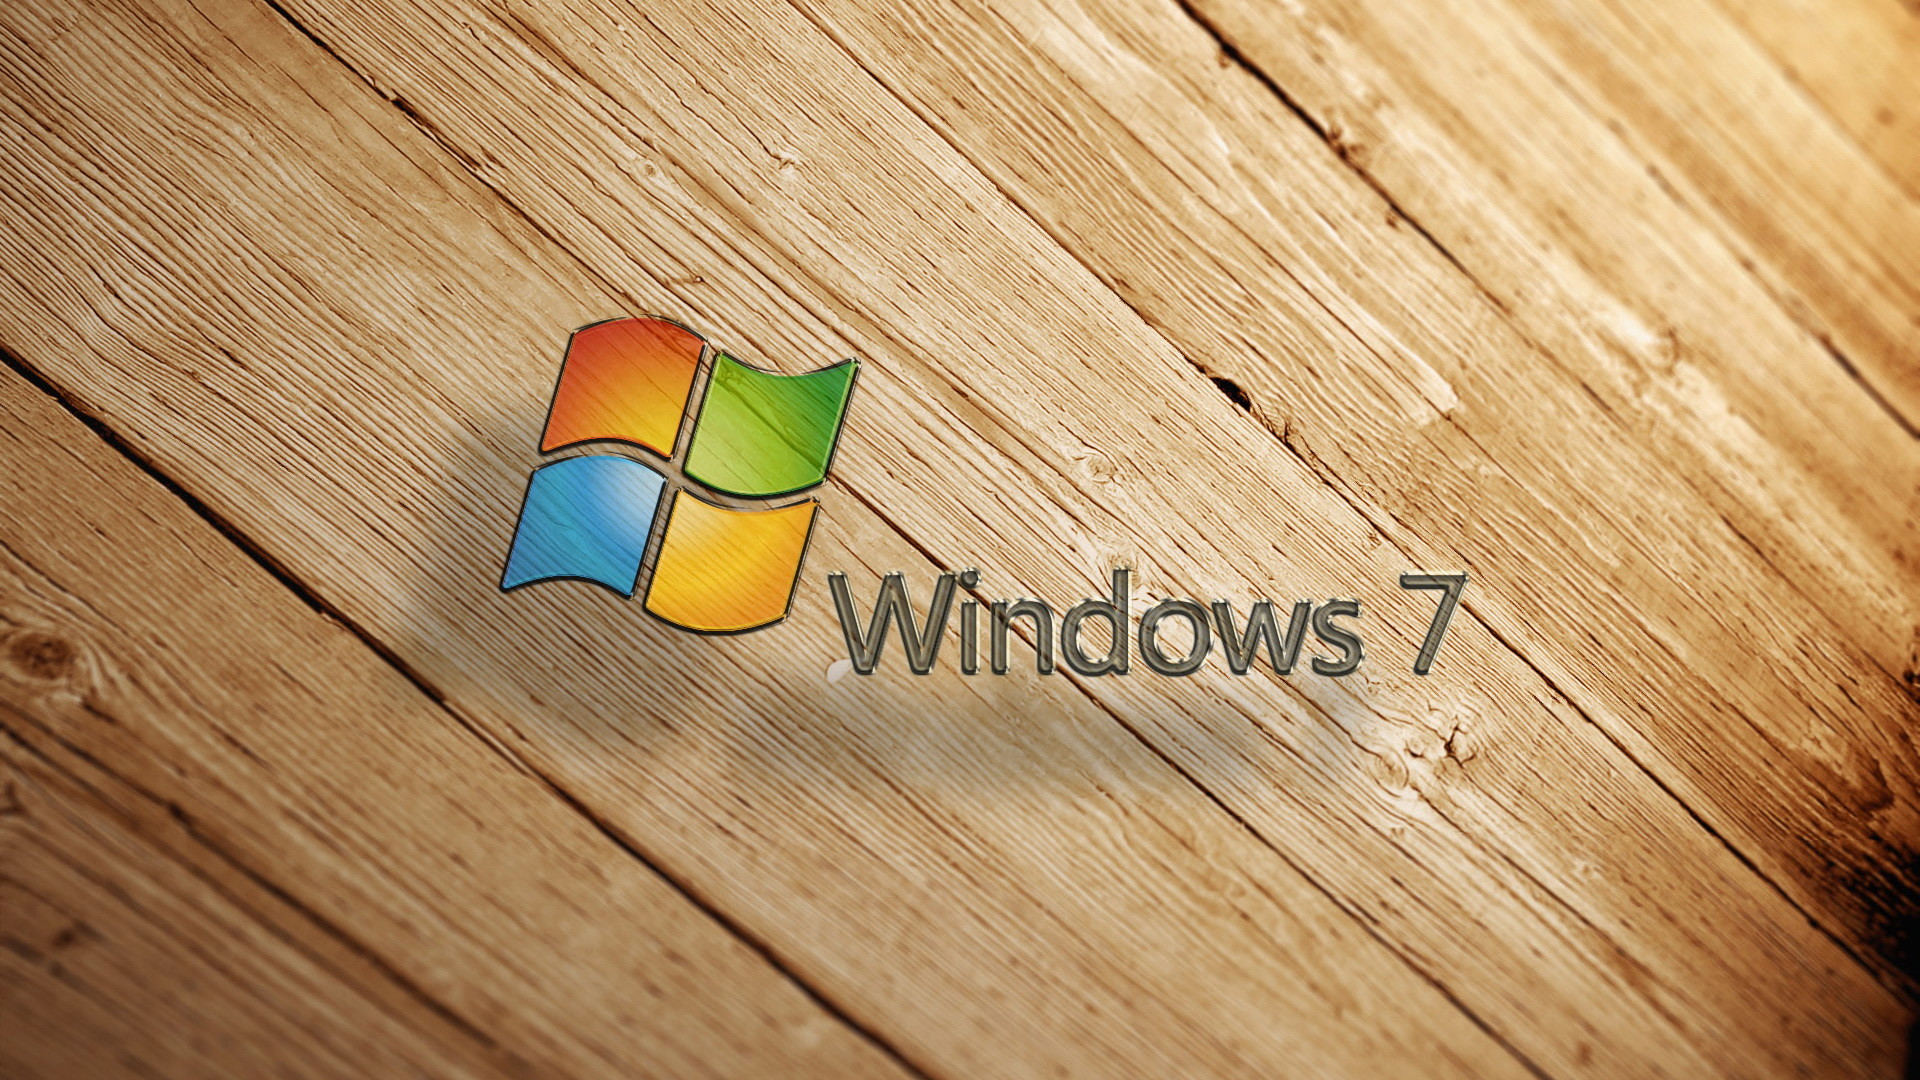 1920x1080 Windows 7 Wood Backgrounds HD Picture Wallpaper